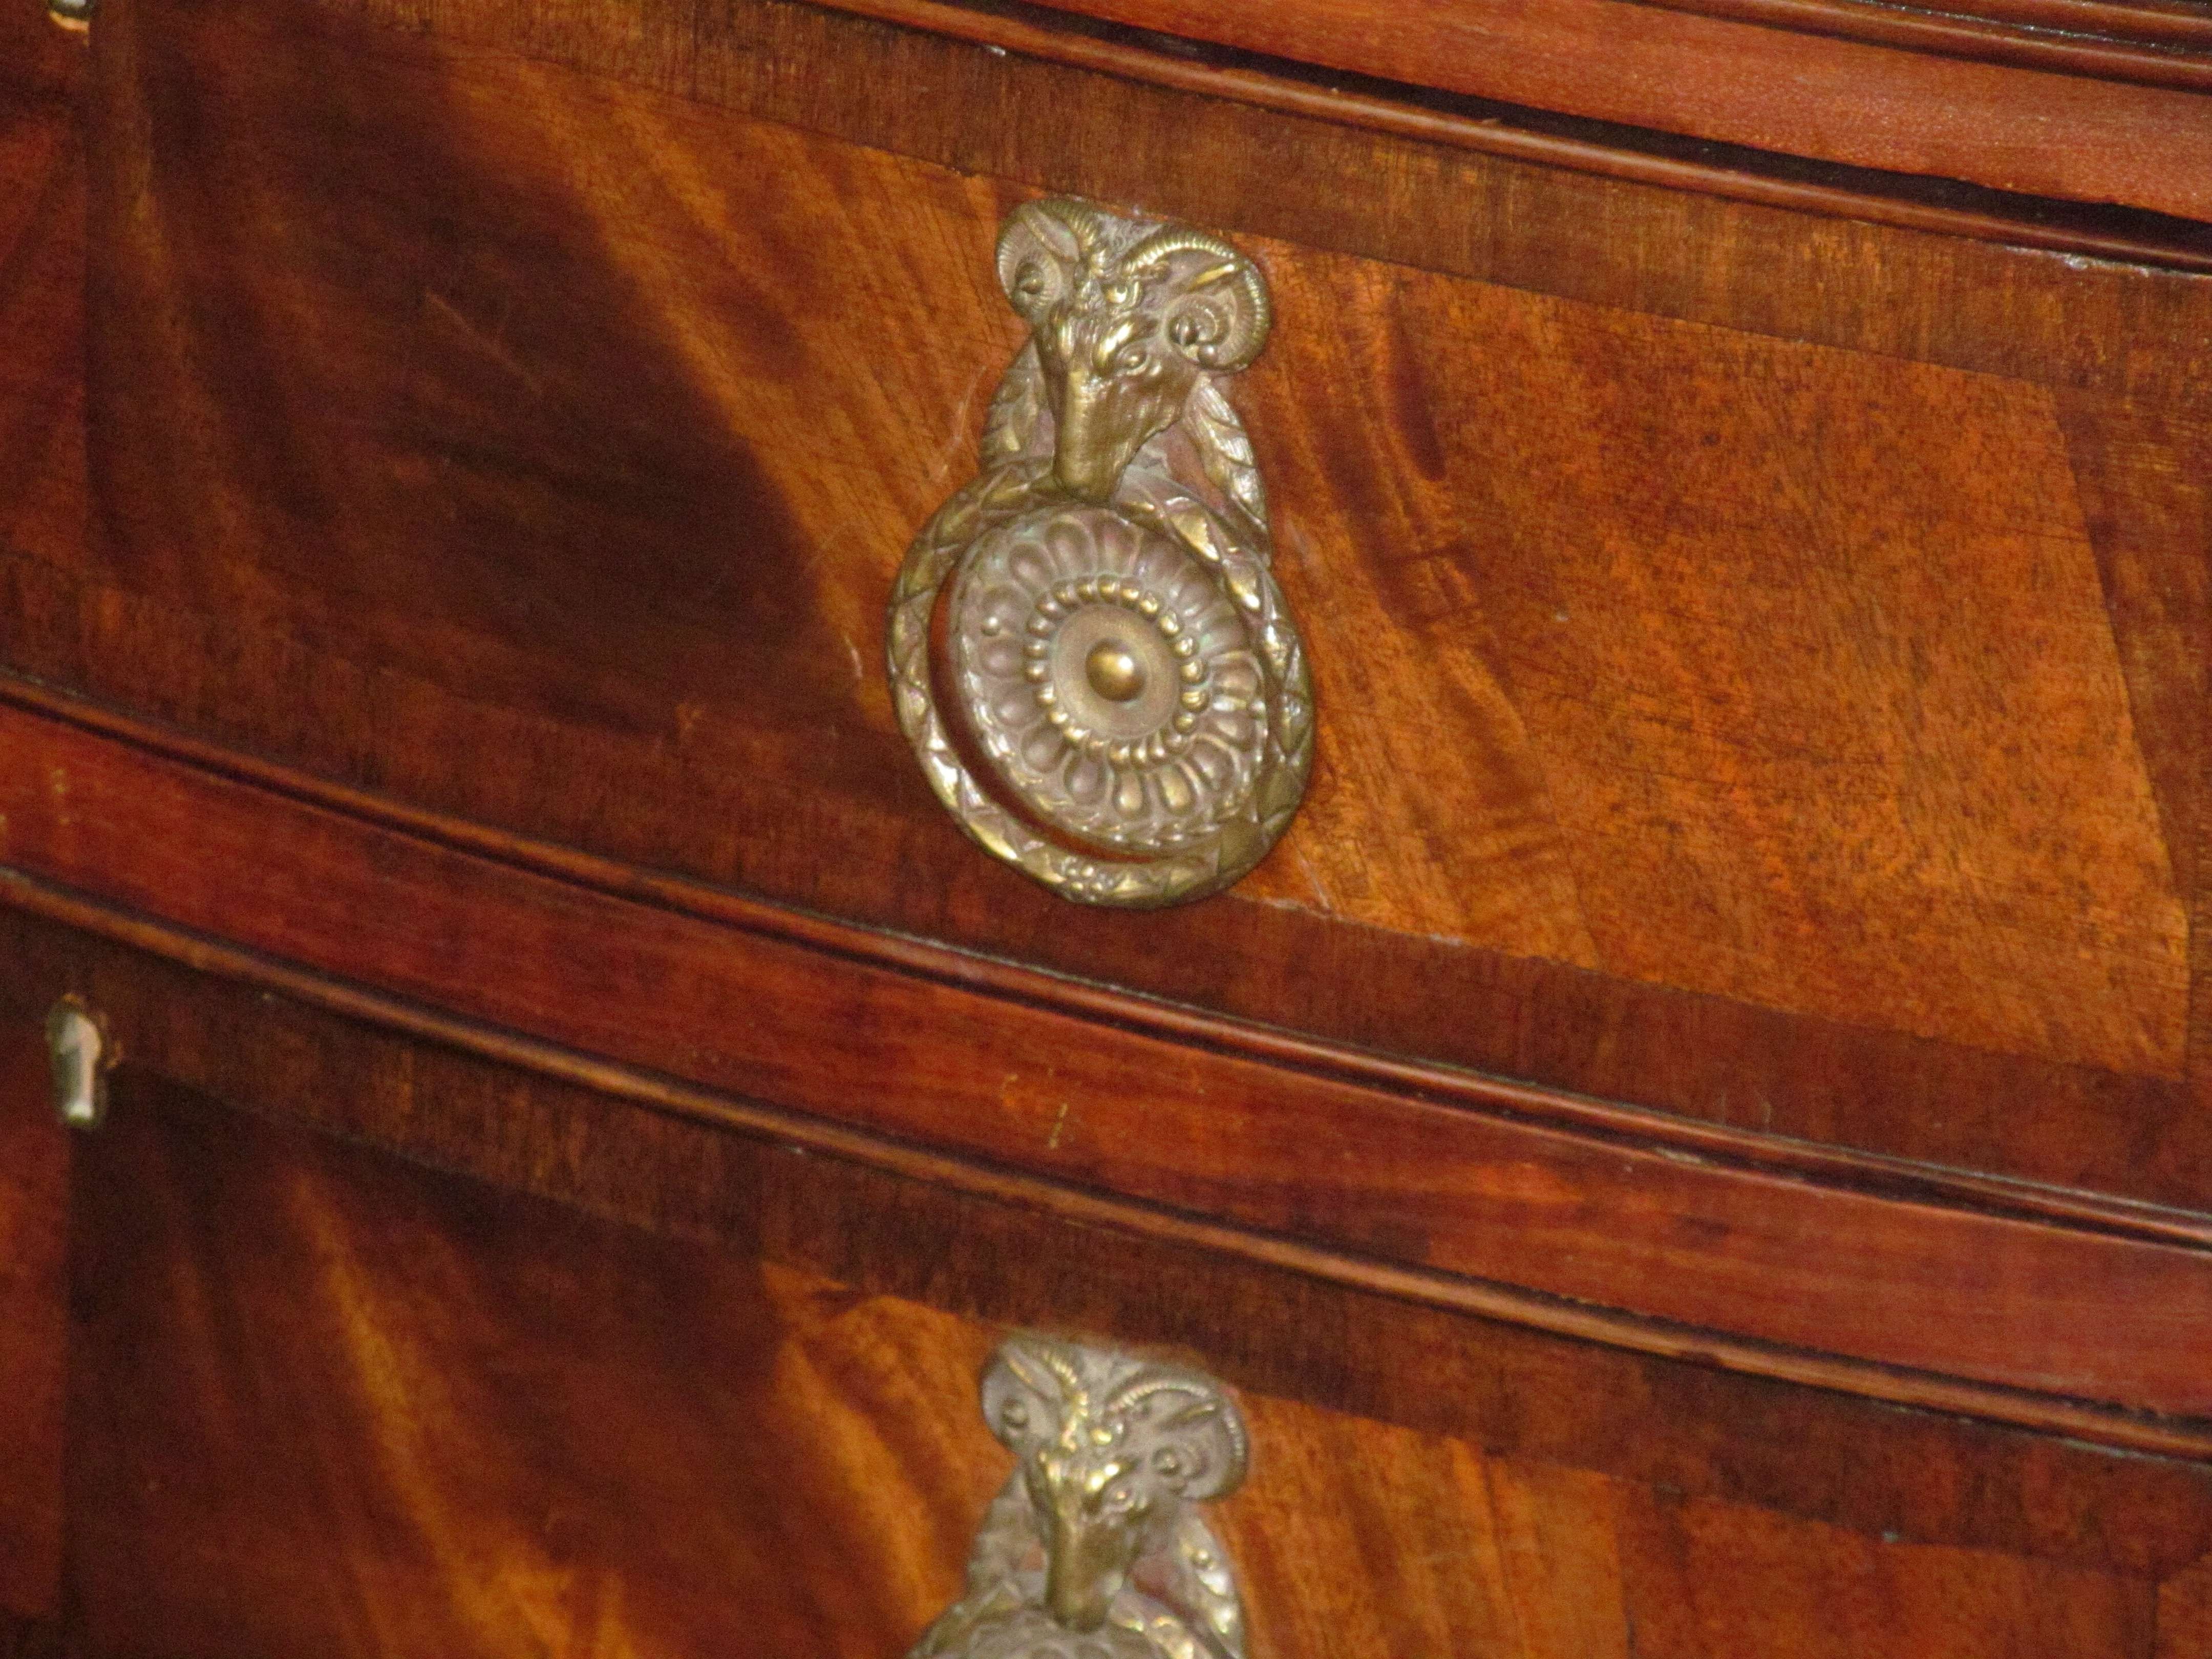 Antique English Crotch Mahogany Serpentine Front Hepplewhite Style Intended For Hepplewhite Sideboards (View 12 of 20)